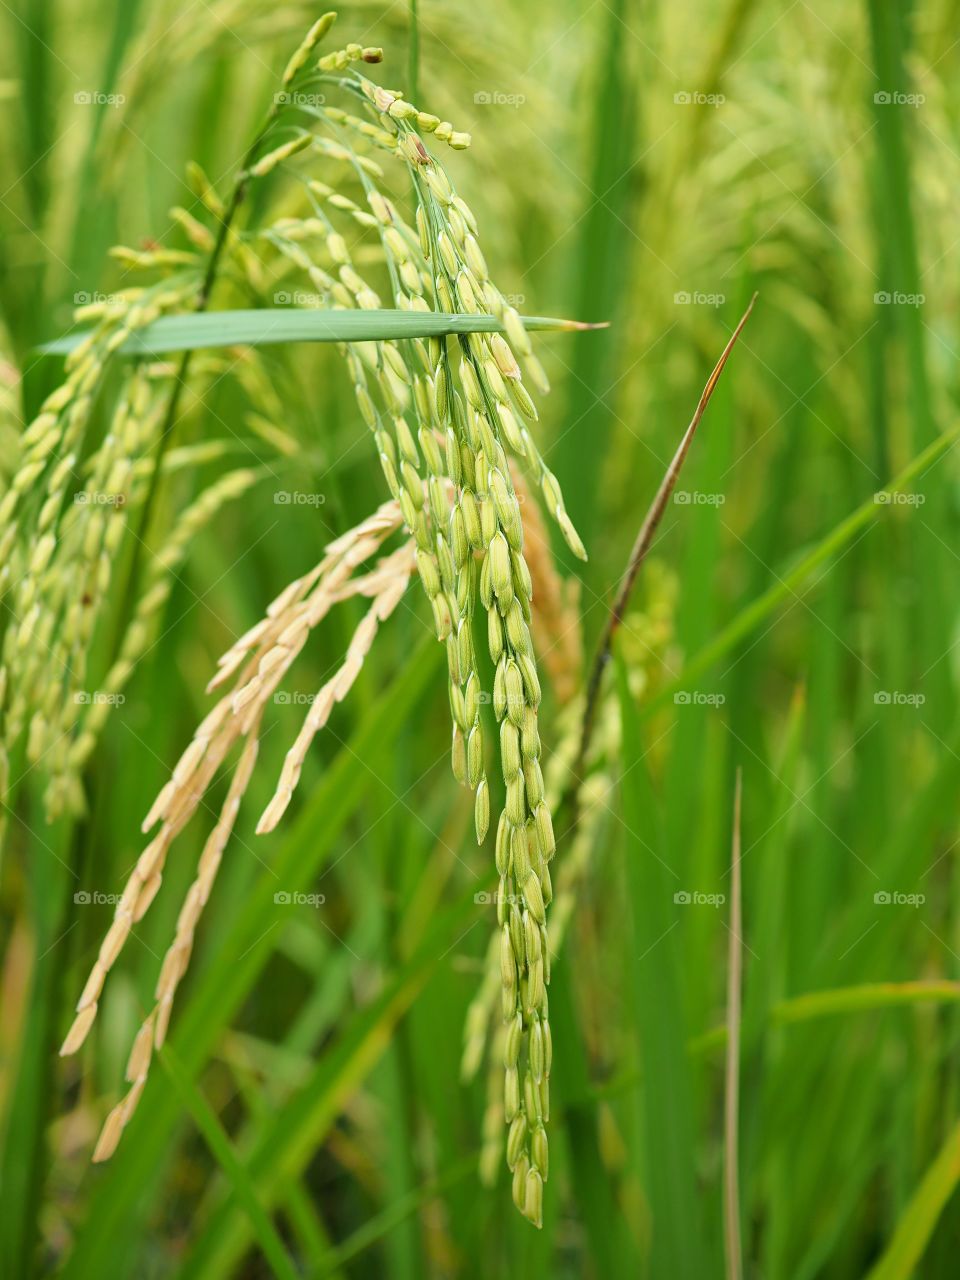 Cereal, Growth, Rural, Grass, Flora